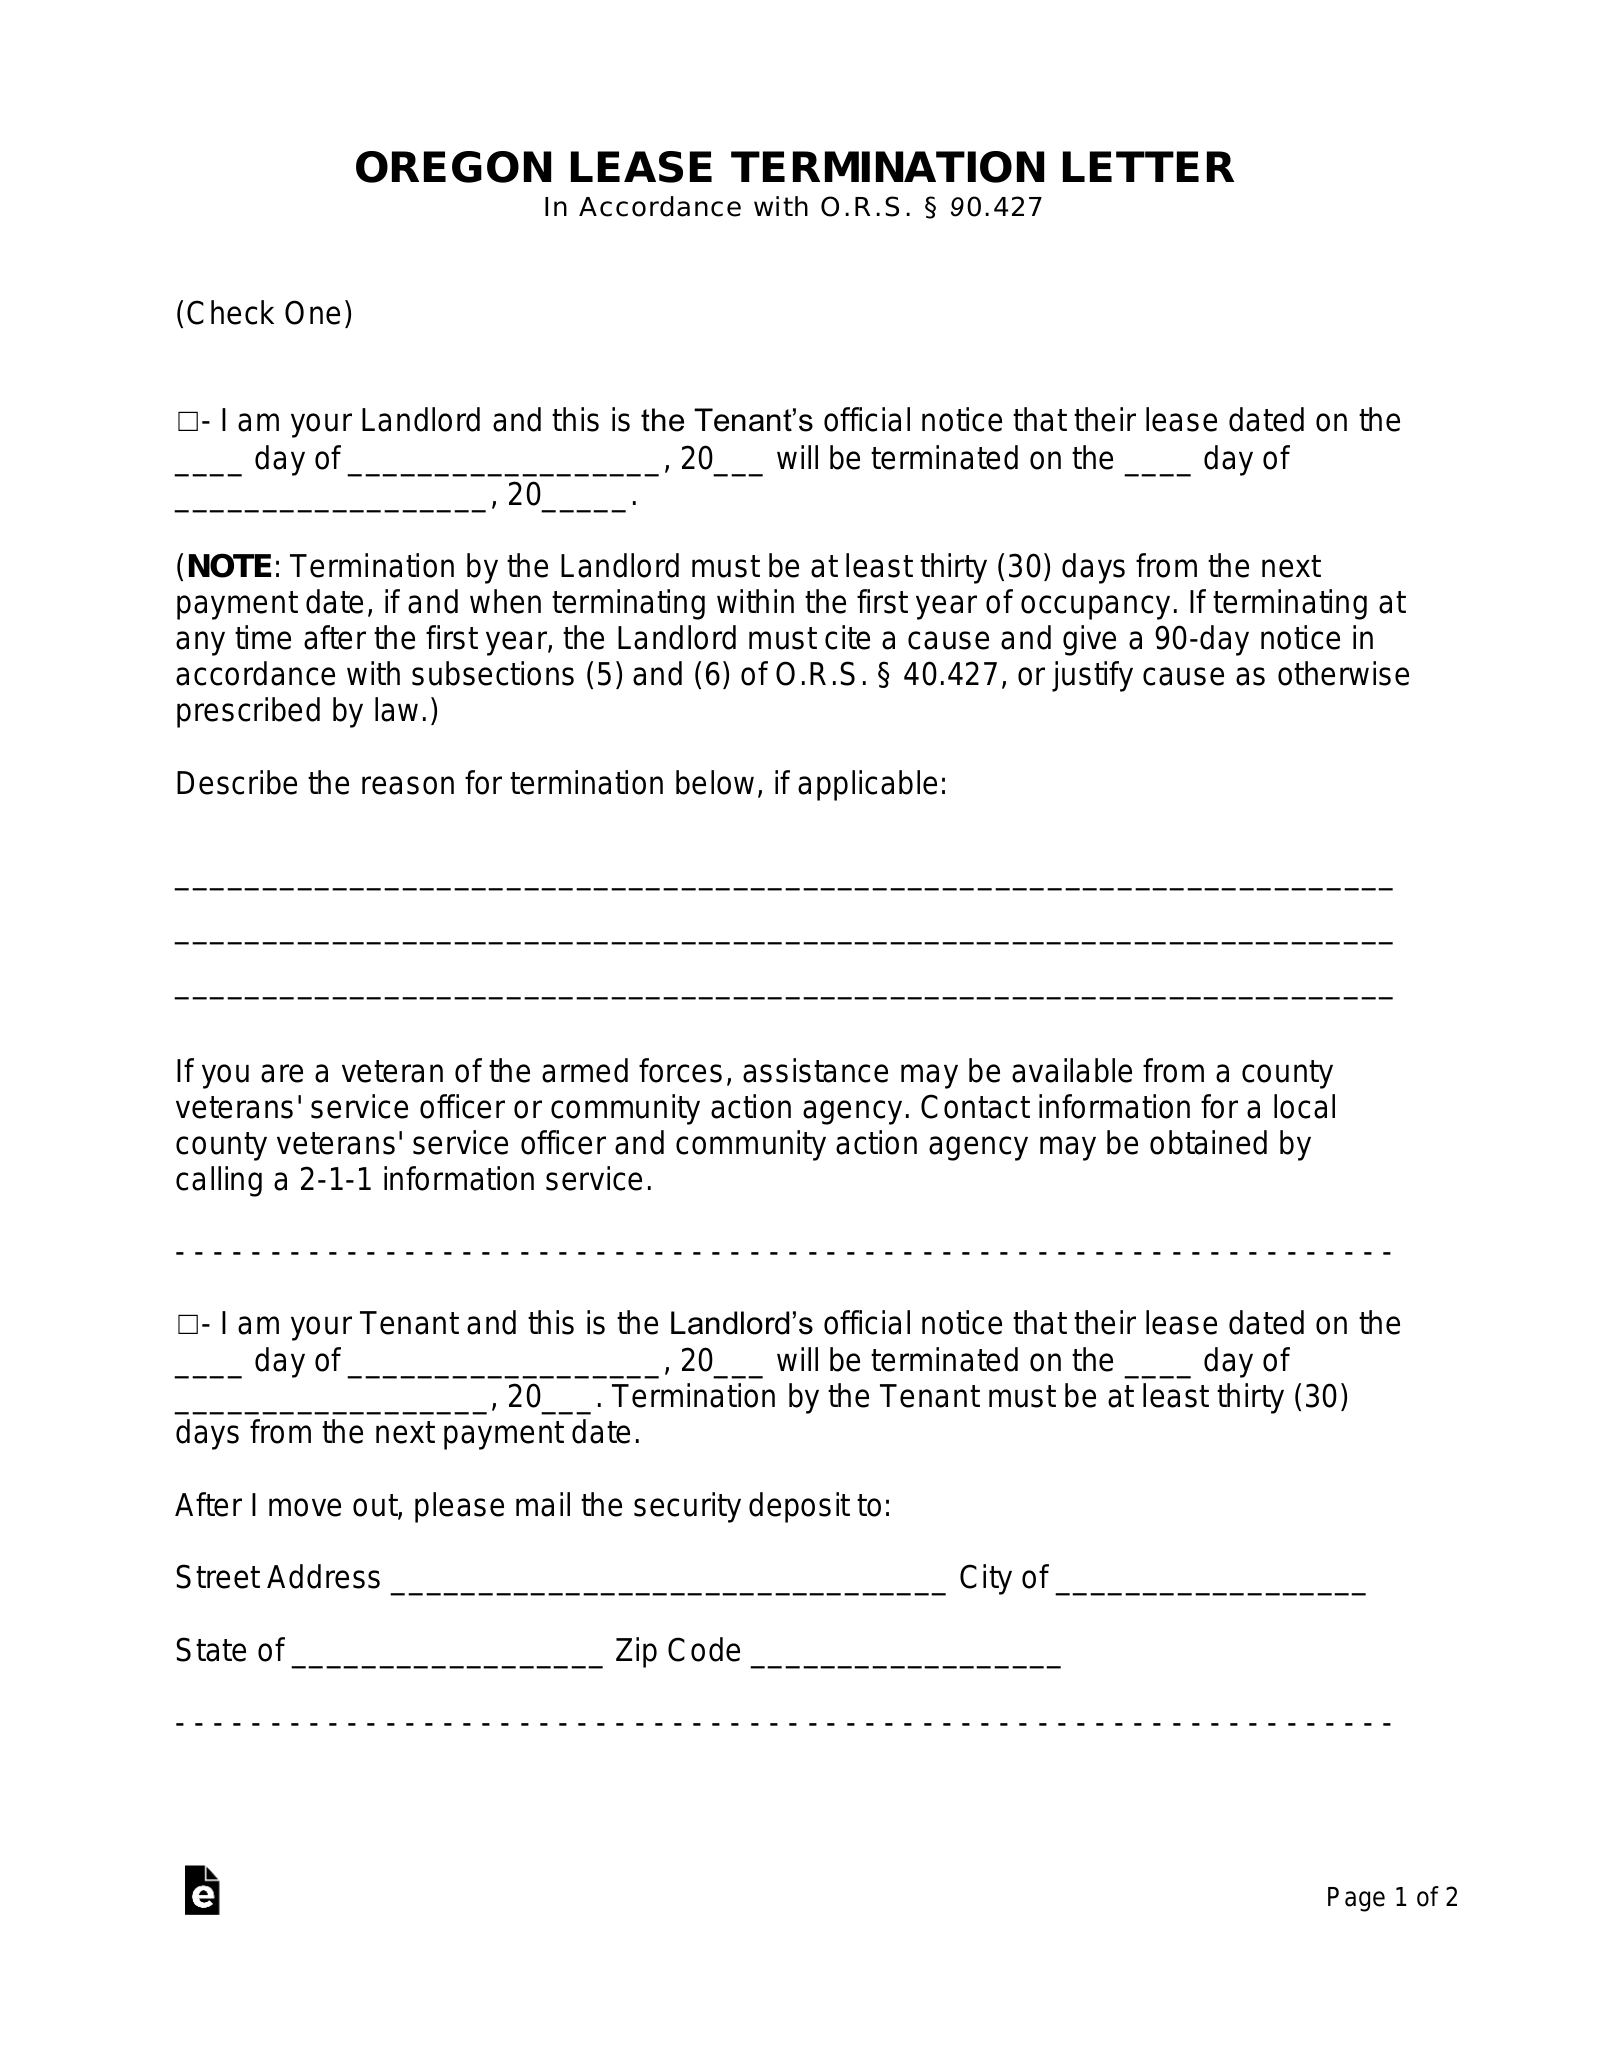 Move Out Letter Template from eforms.com